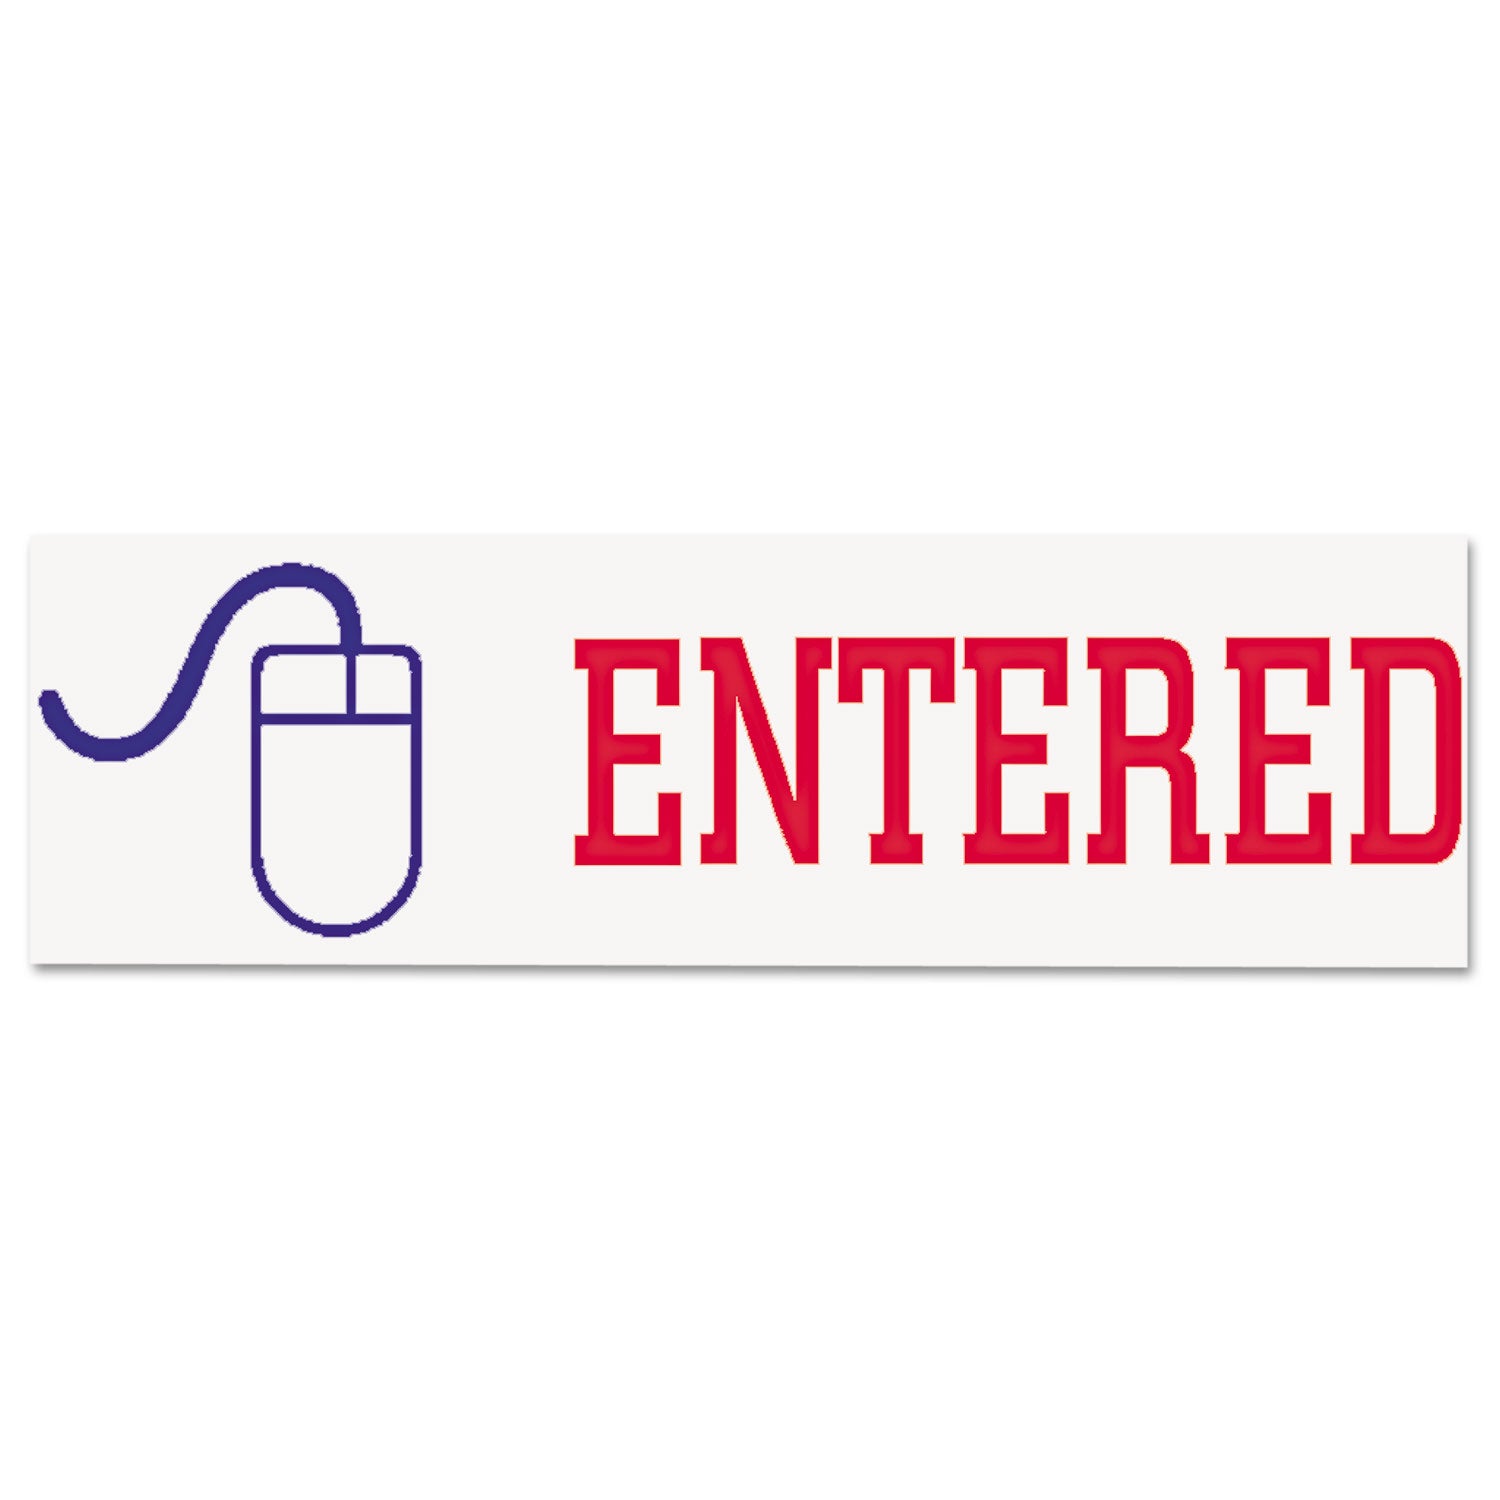 Two-Color Title Stamp, ENTERED, Blue/Red - 